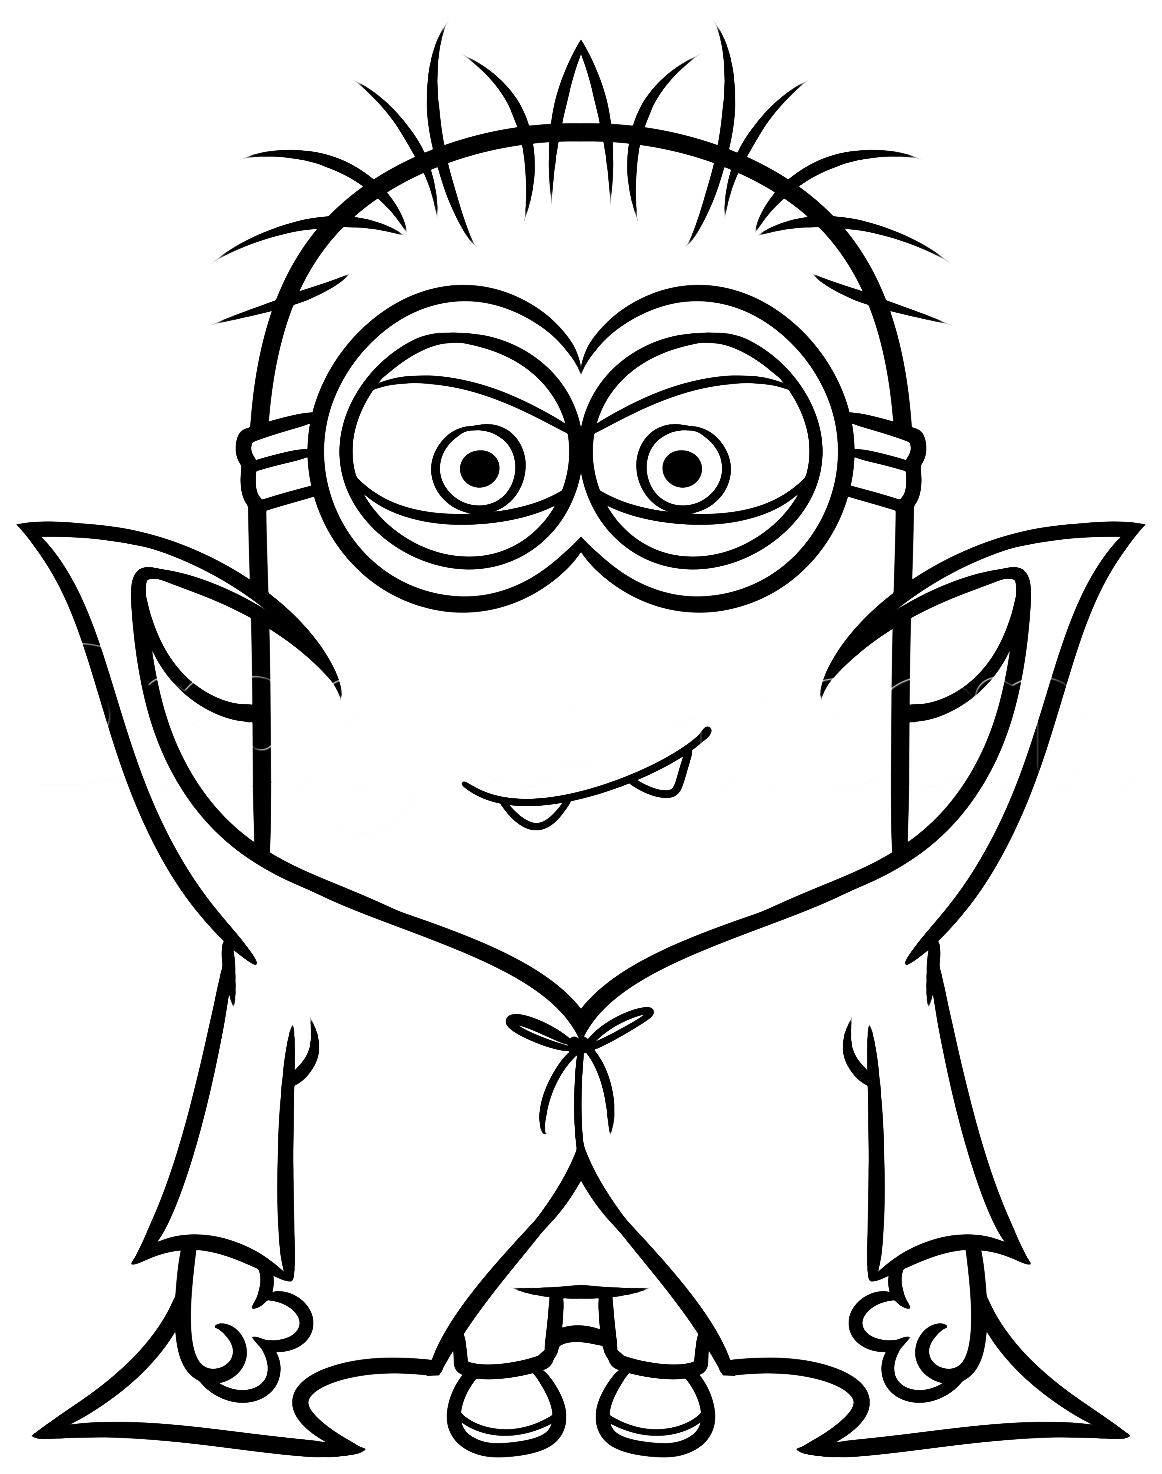 Minions coloring pages | Free Coloring Pages